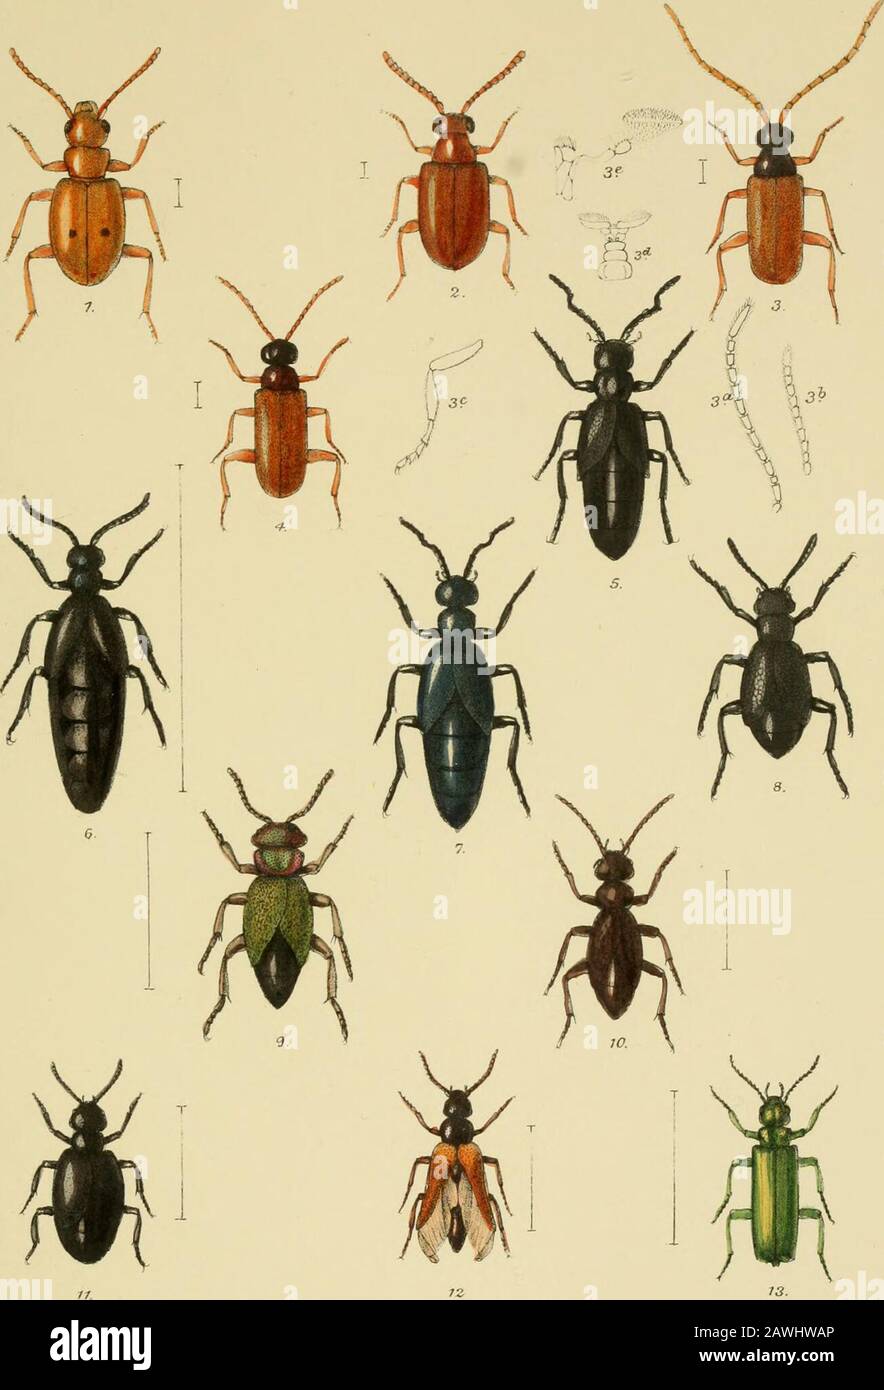 The Coleoptera of the British islandsA descriptive account of the families, genera, and species indigenous to Great Britain and Ireland, with notes as to localities, habitats, etc . R.Morgaxi,del.etlitK. VlivcentBrooksTDaY&SonjTap L Heeve & C^ Loncori Mf a.. TY PLATE OLI. Fig. 1. Anthicus biraaculatus, III. 2. Xylophilus populneus, F. 3. „ oculatus, F., male. 3a. „ „ antenna of male. 3b. „ „ antenna of female. 3c. „ „ inteimediate leg. 3d. „ „ labrum. 3e. „ „ maxillary palpus. 4. „ „ female. 5. Meloe proscarabseus, L., male. 6. ,, „ female. 7. „ violaceus, Marsh. 8. „ cicatricosus, Leach. 9. „ Stock Photo